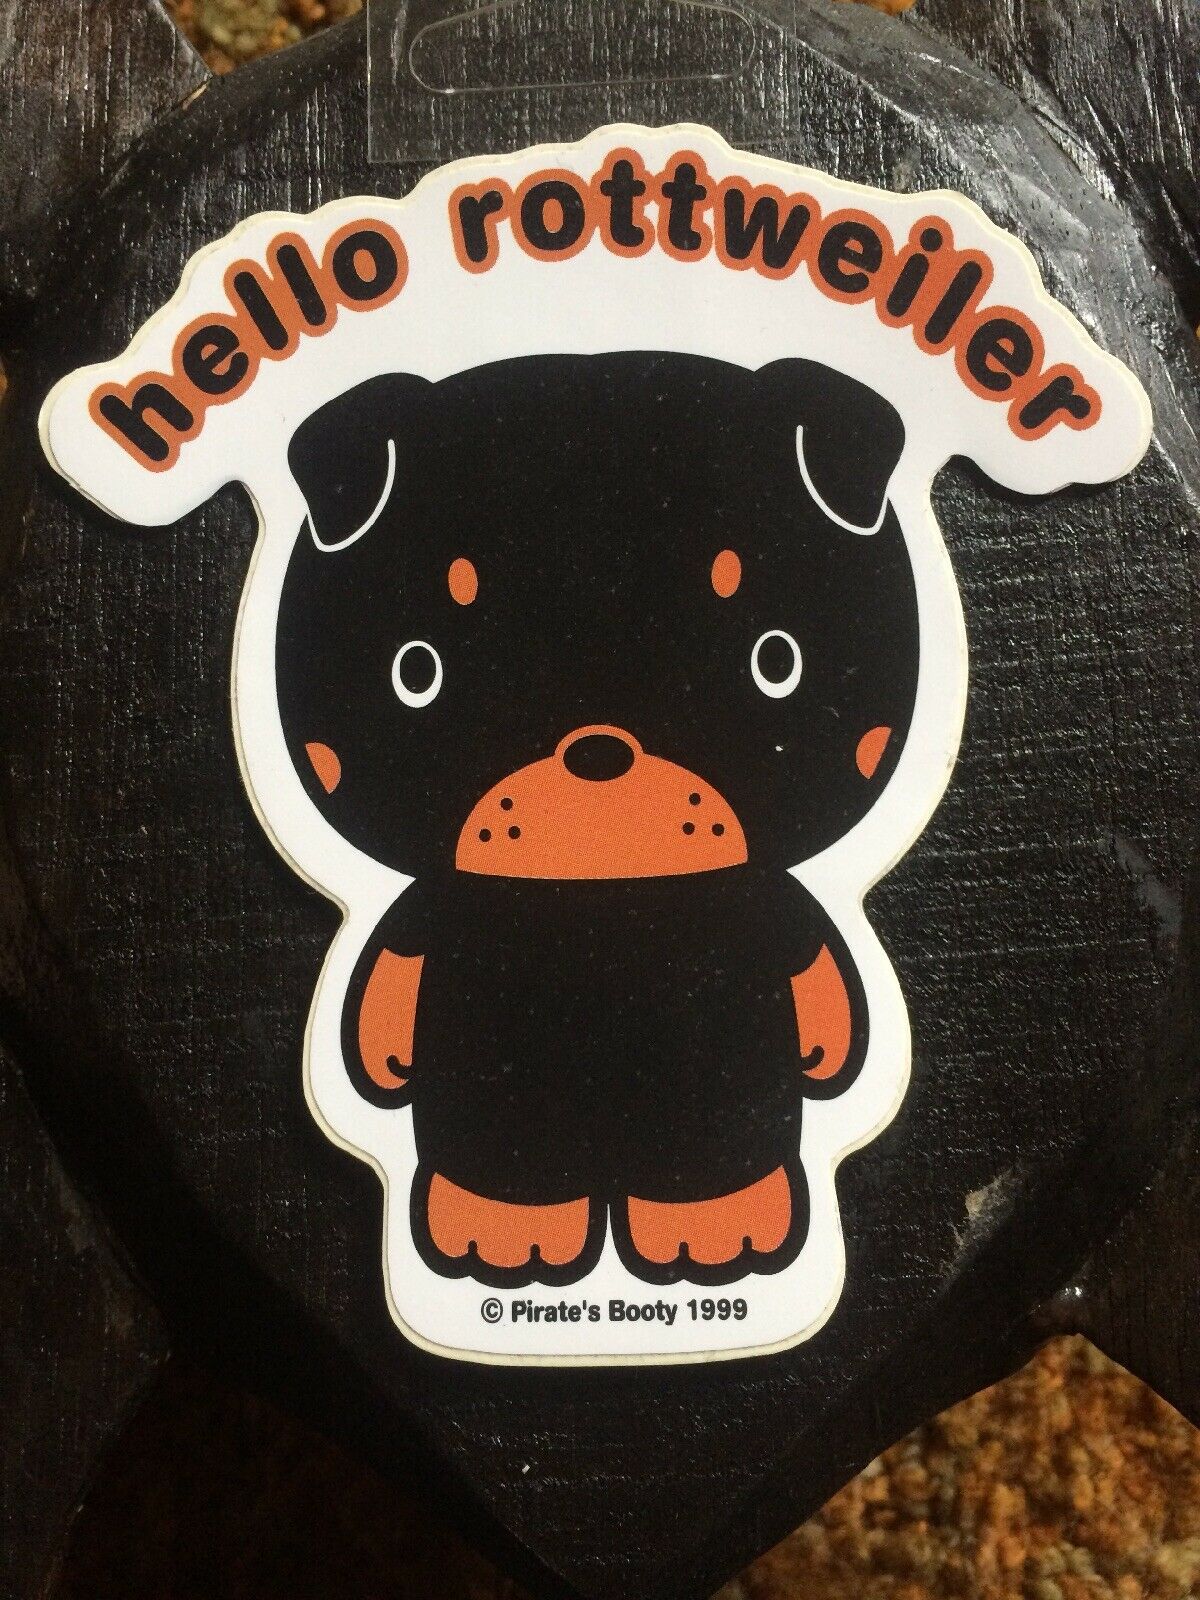 Hello Rottweiler Sticker From Hot Topic Htf